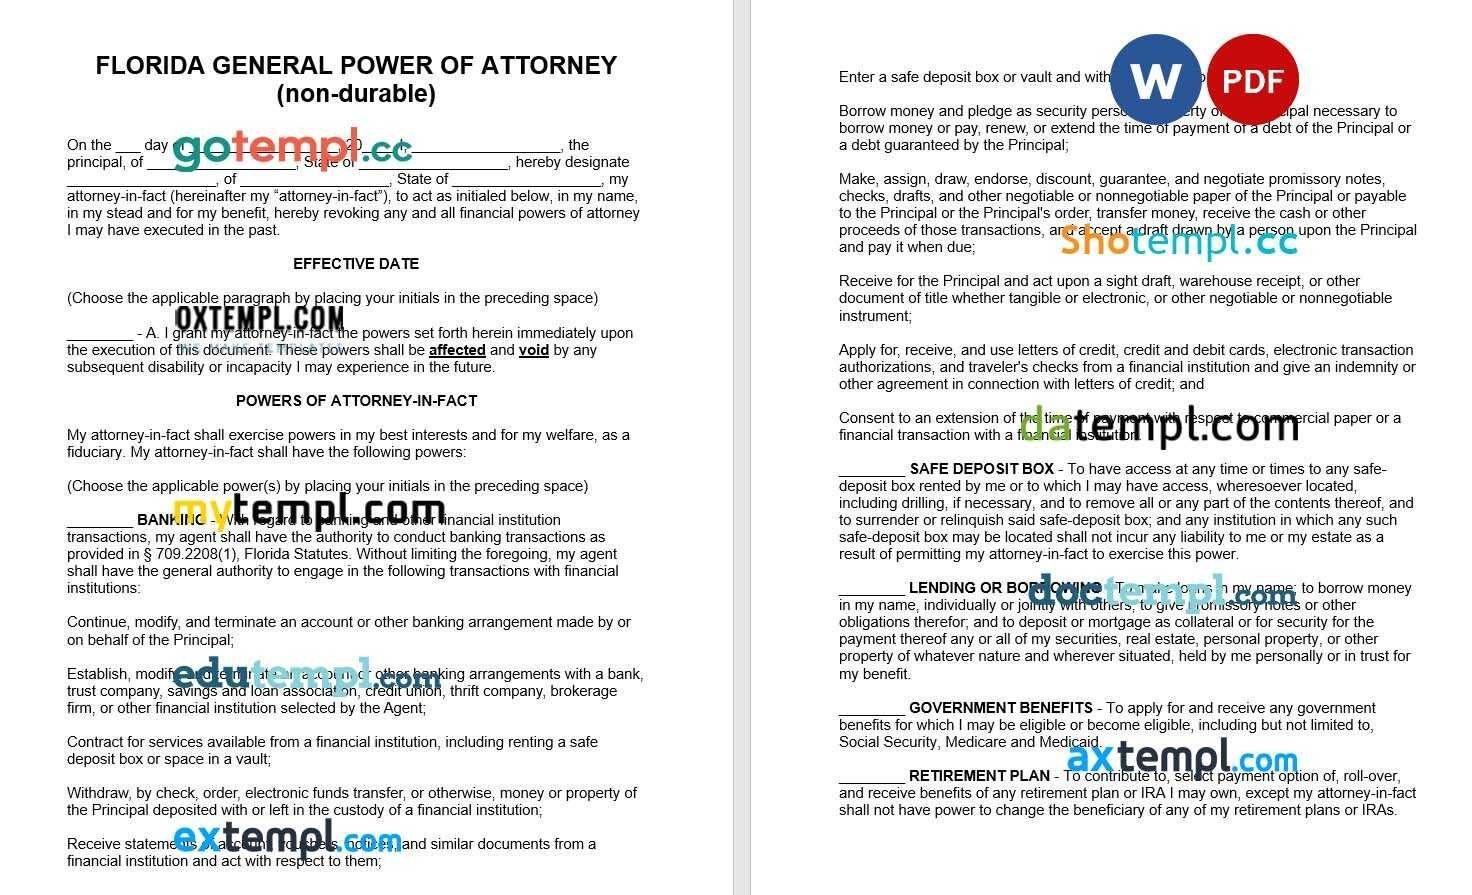 Florida General Power of Attorney example, fully editable